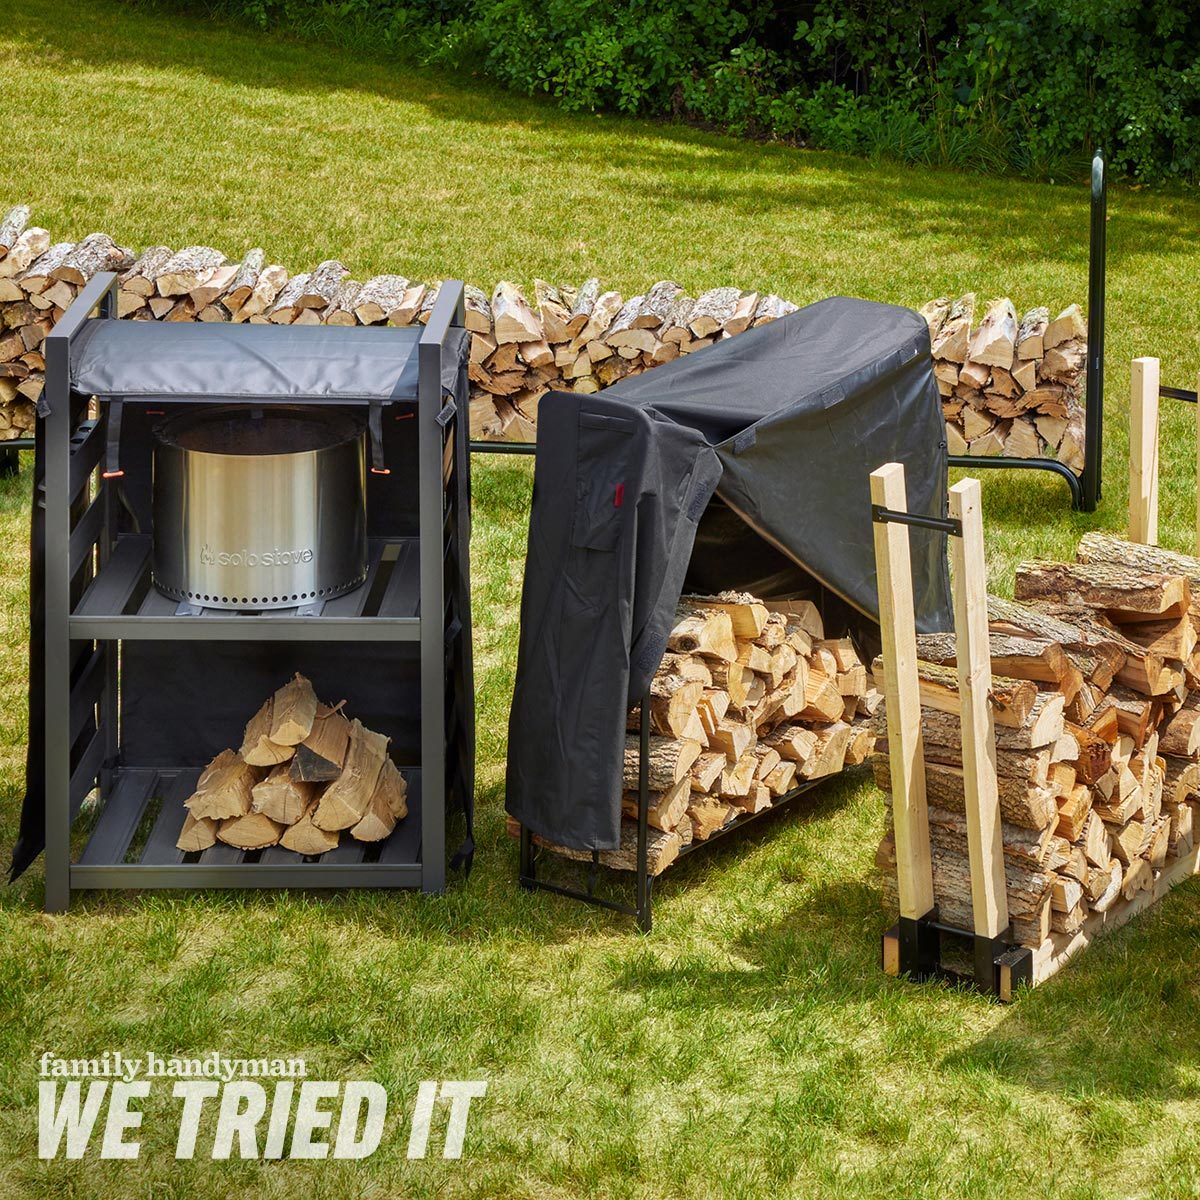 https://www.familyhandyman.com/wp-content/uploads/2022/09/The-10-Best-Firewood-Racks-to-Hold-Store-and-Neatly-Stack-Wood-Editor-Tested-FHMA_KS_Fireracks_08_01_008-Group_FT.jpg